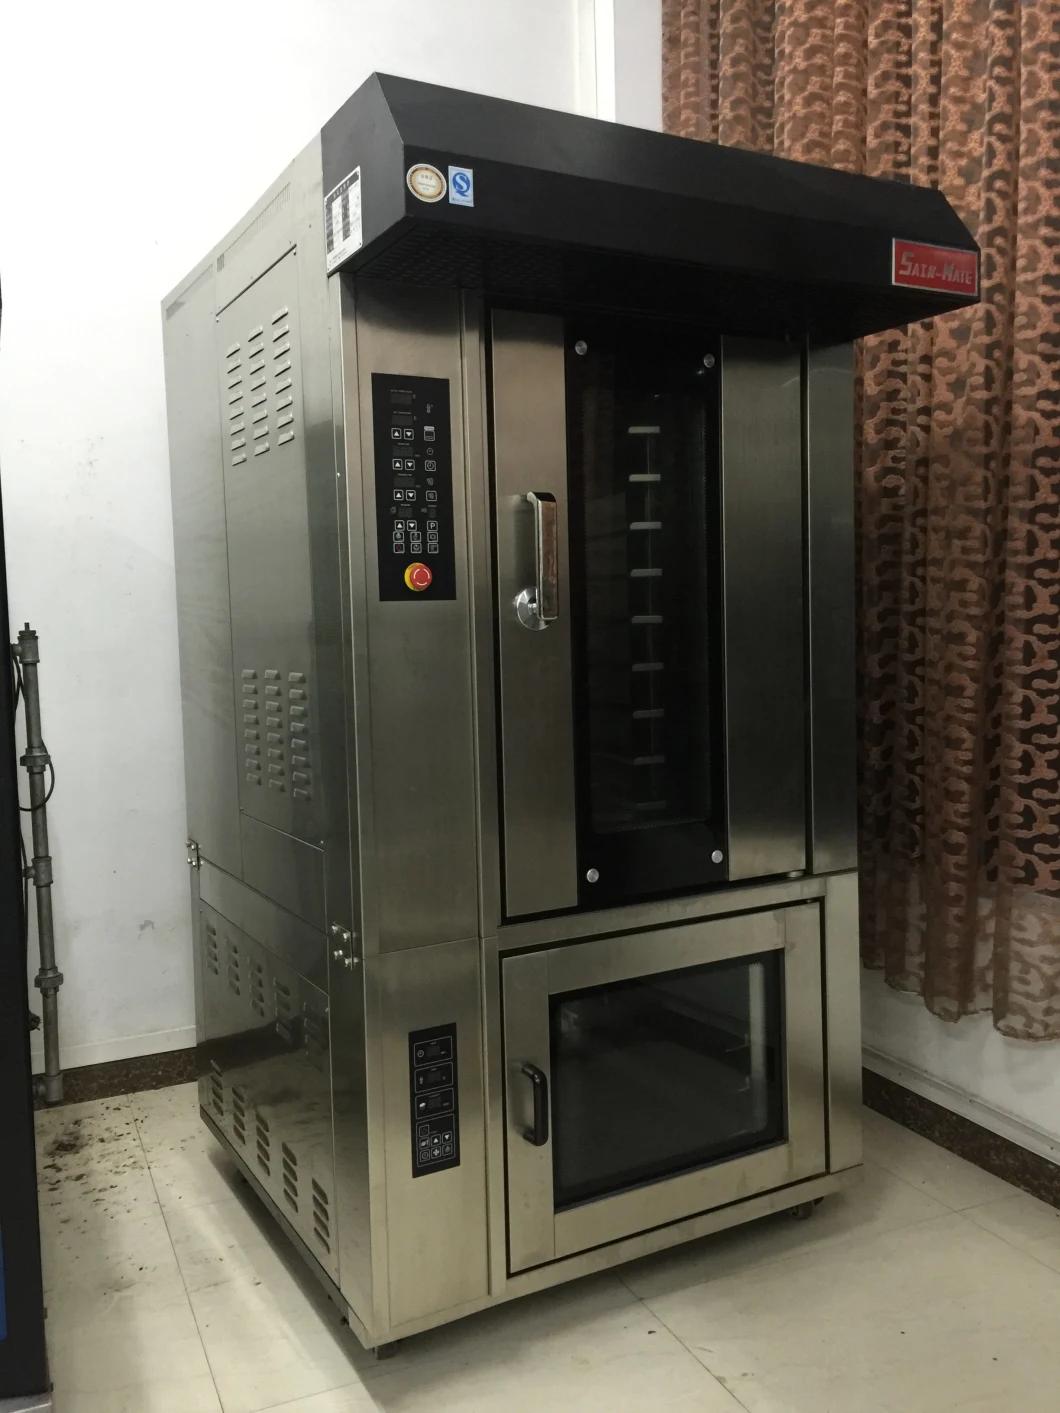 Convection Oven Deck Baking Oven Prooing 3 Funcitons in 1 Combination Oven Machine for Bread Shop Baking, Proofing, Biscuits Baking